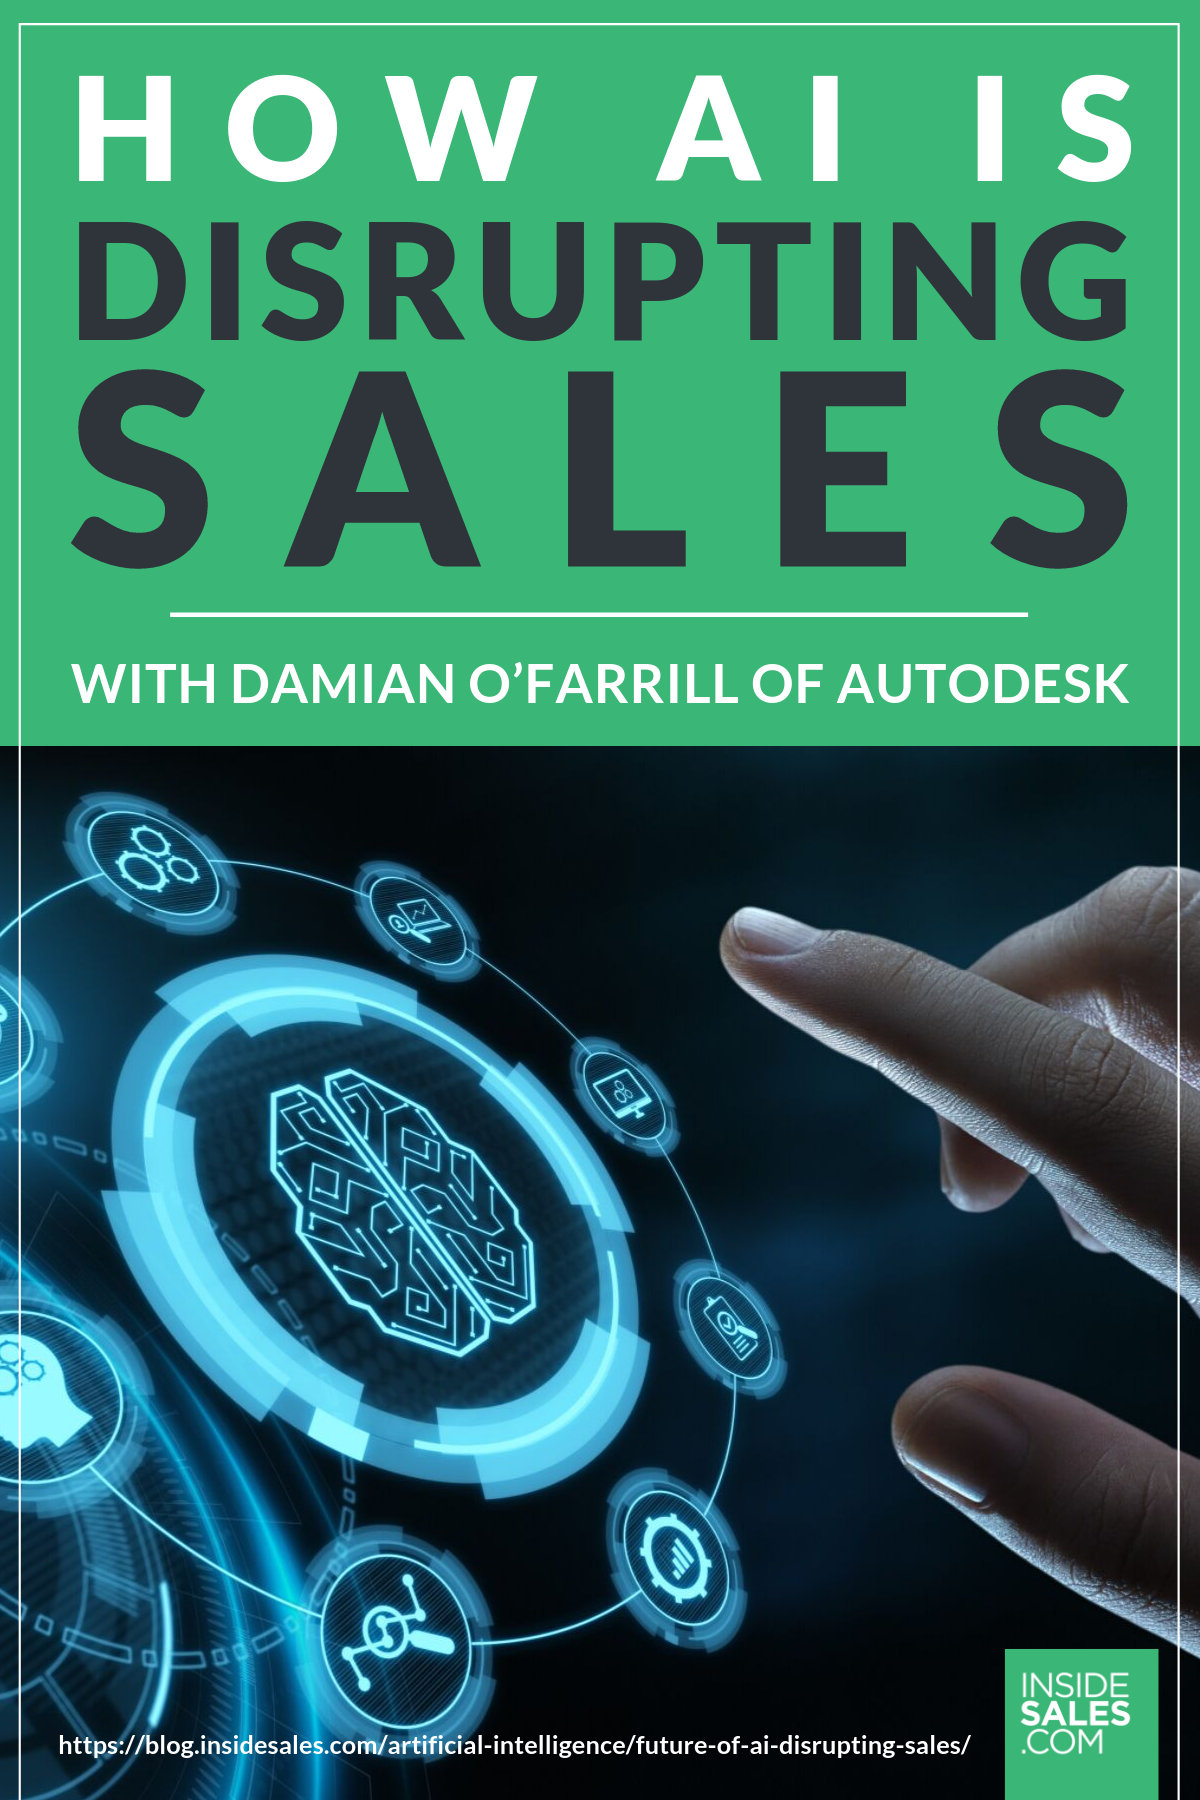 How AI Is Disrupting Sales w/Damian O’Farrill @Autodesk https://resources.insidesales.com/blog/artificial-intelligence/future-of-ai-disrupting-sales/